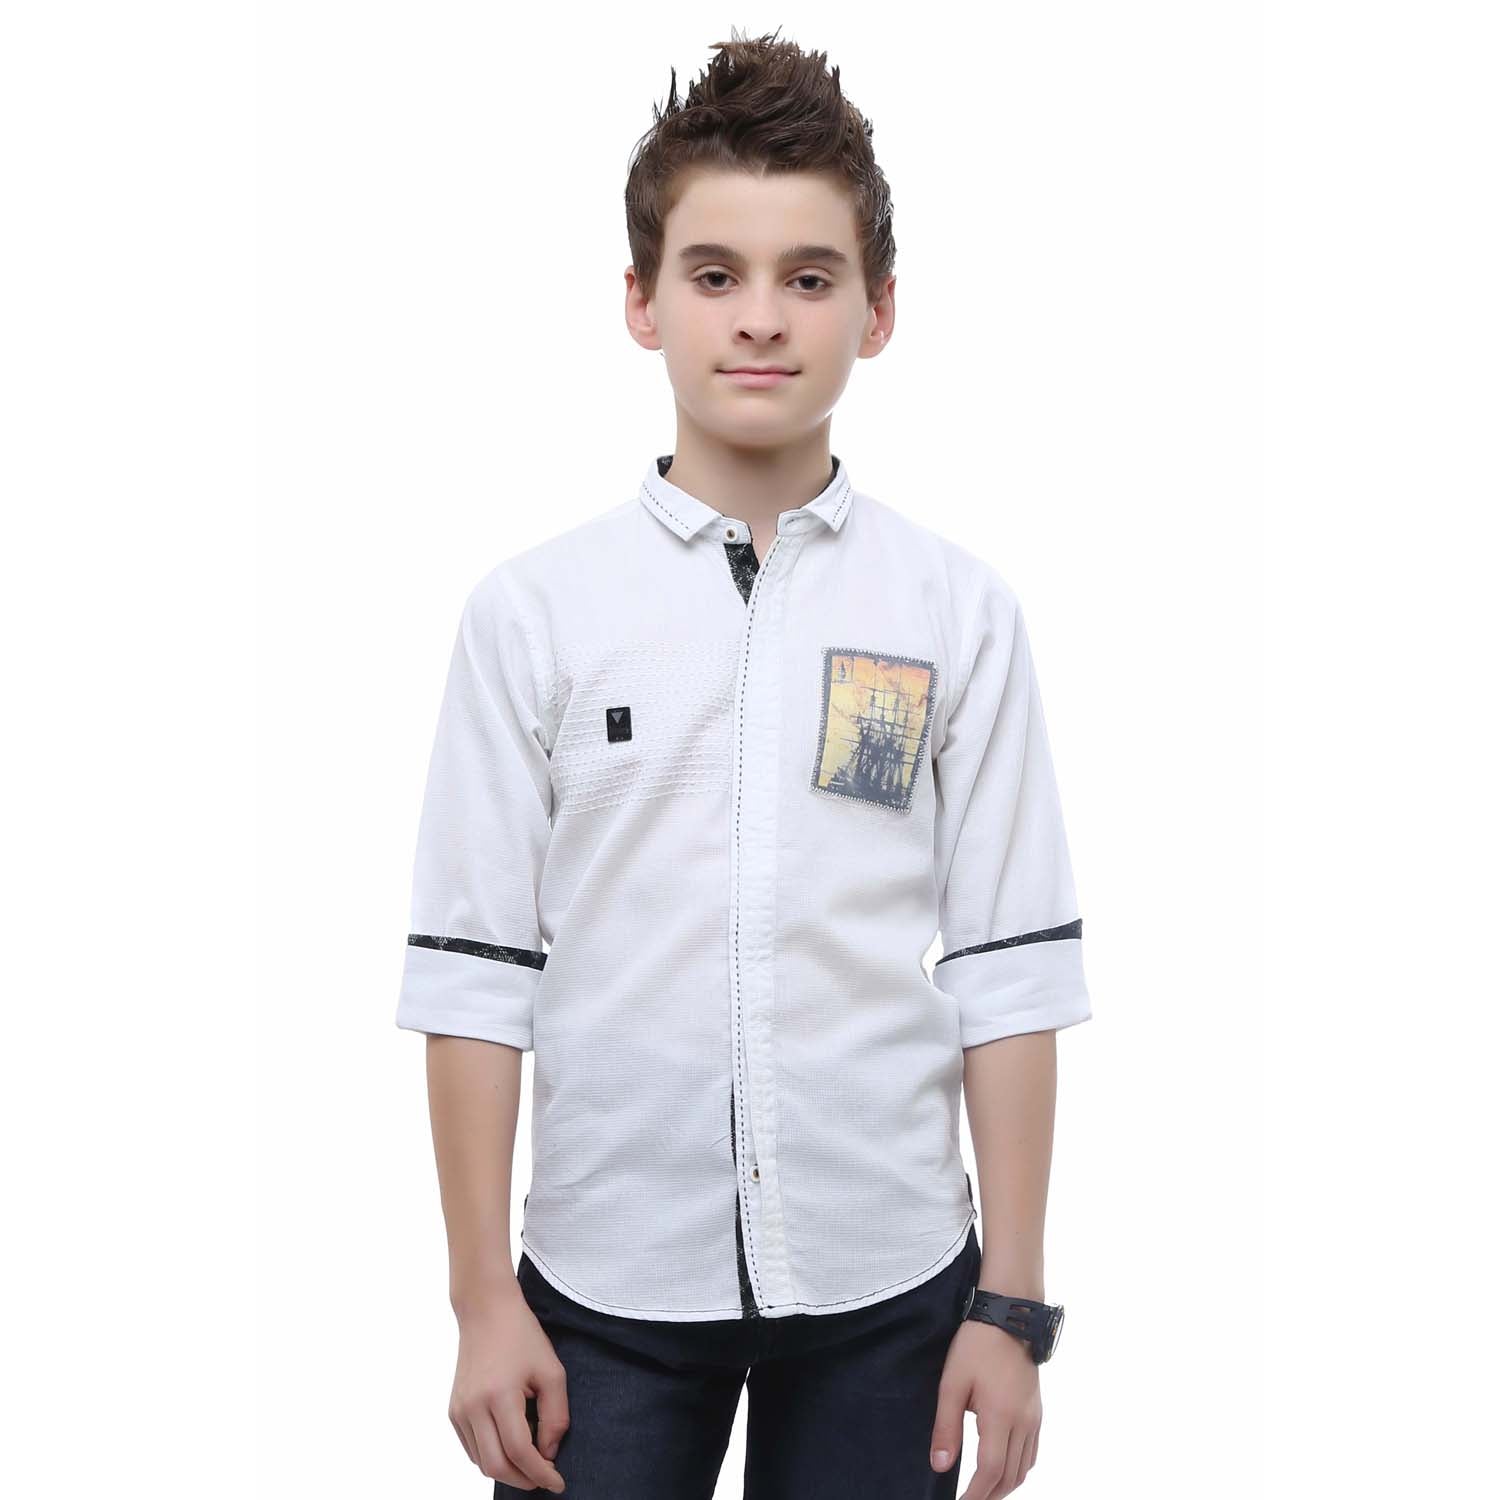 Designer Party Shirts for Young Boys (6-16 years) for Festive